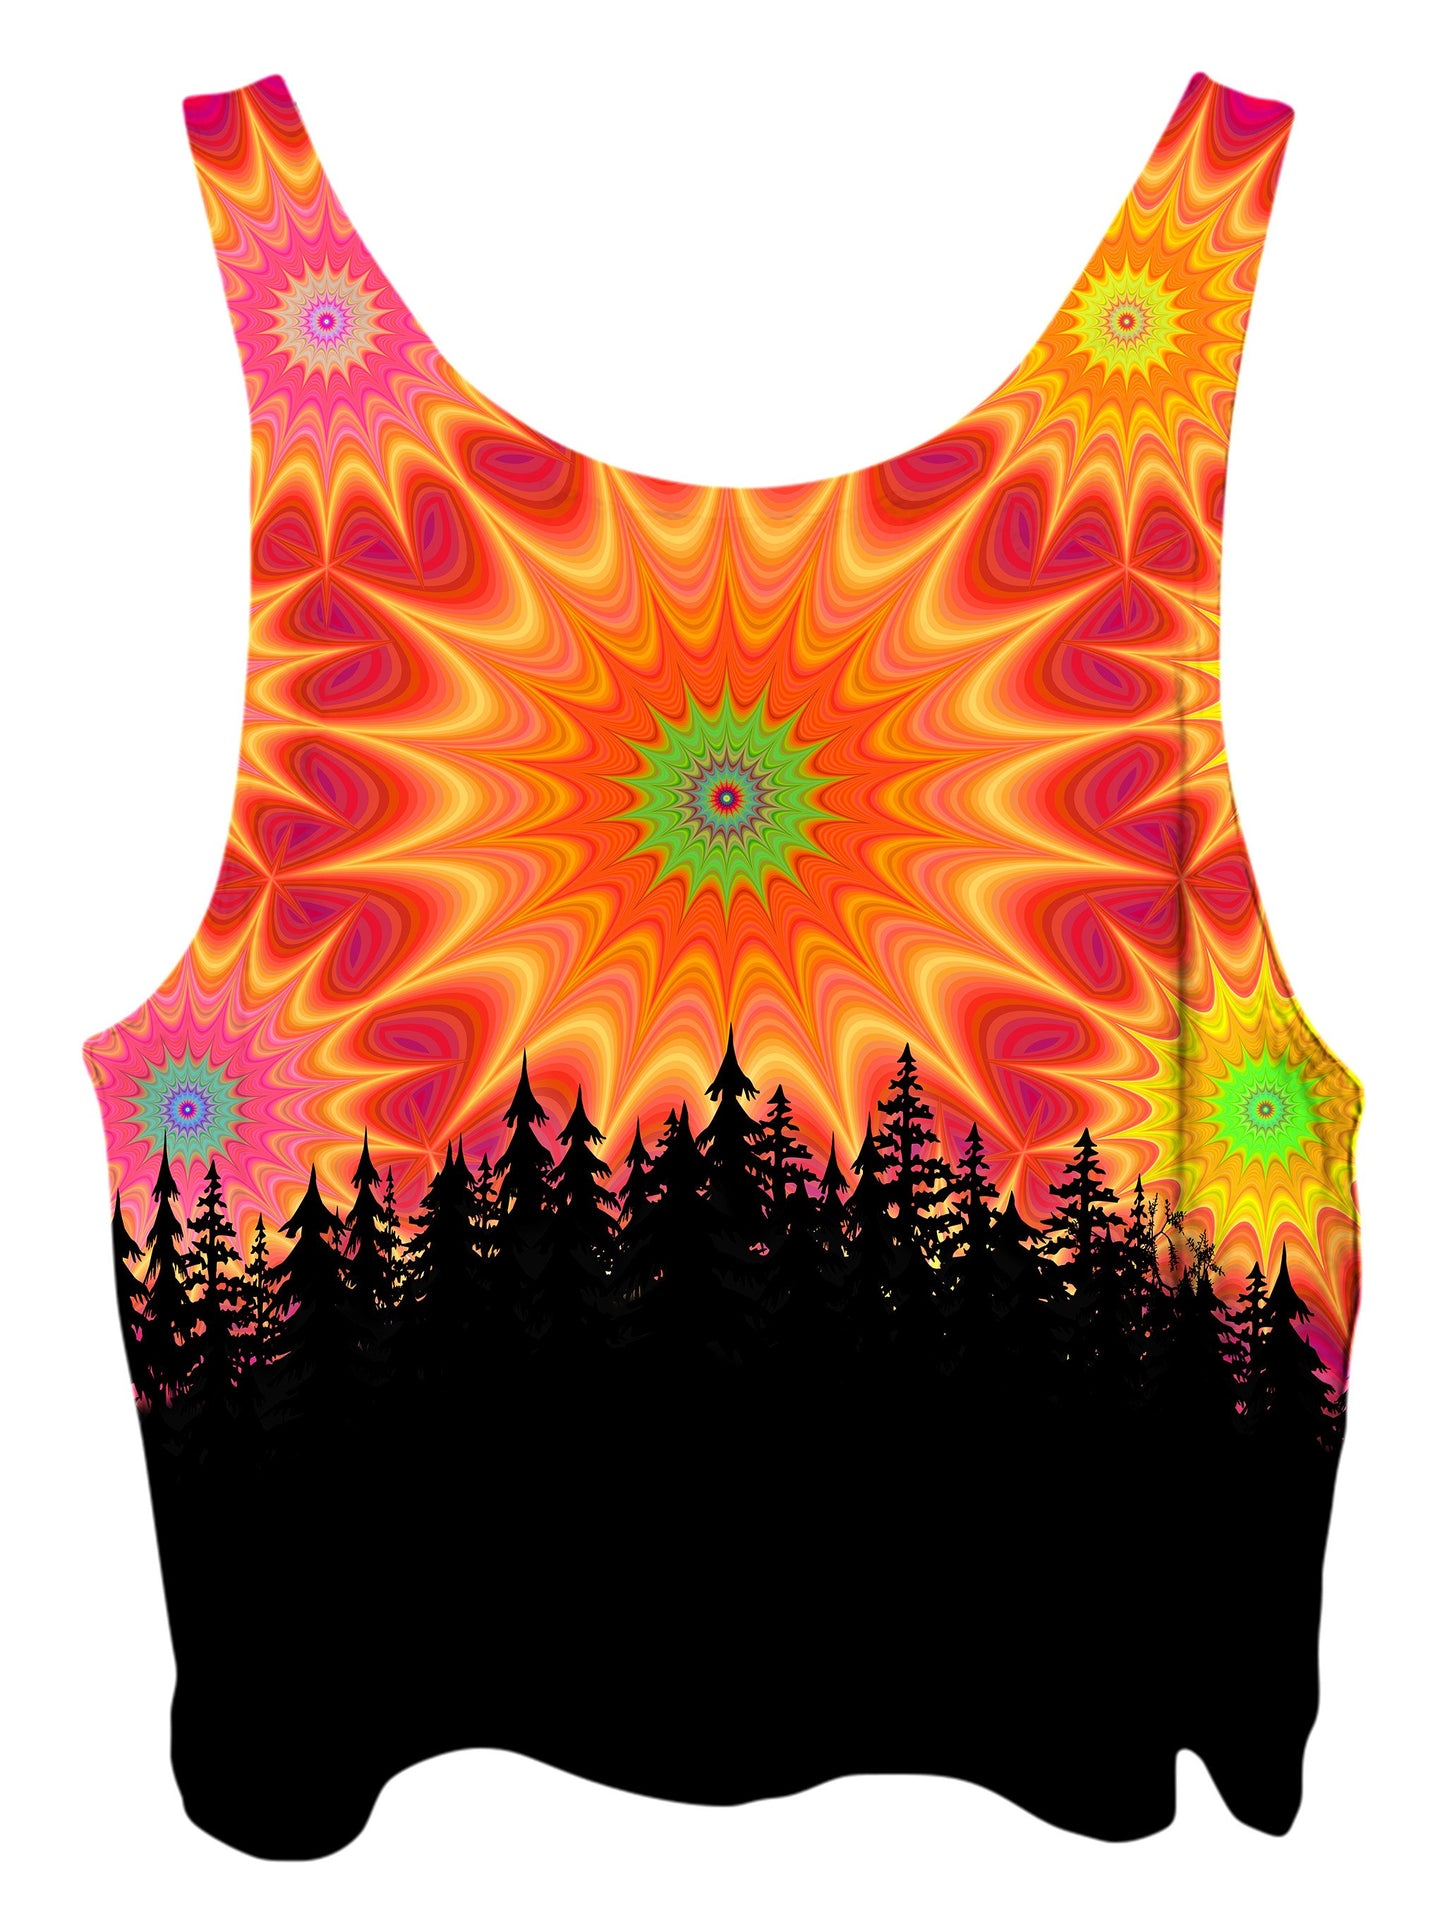 All over print psychedelic sacred geometry nature cropped top by Gratefully Dyed Apparel back view.